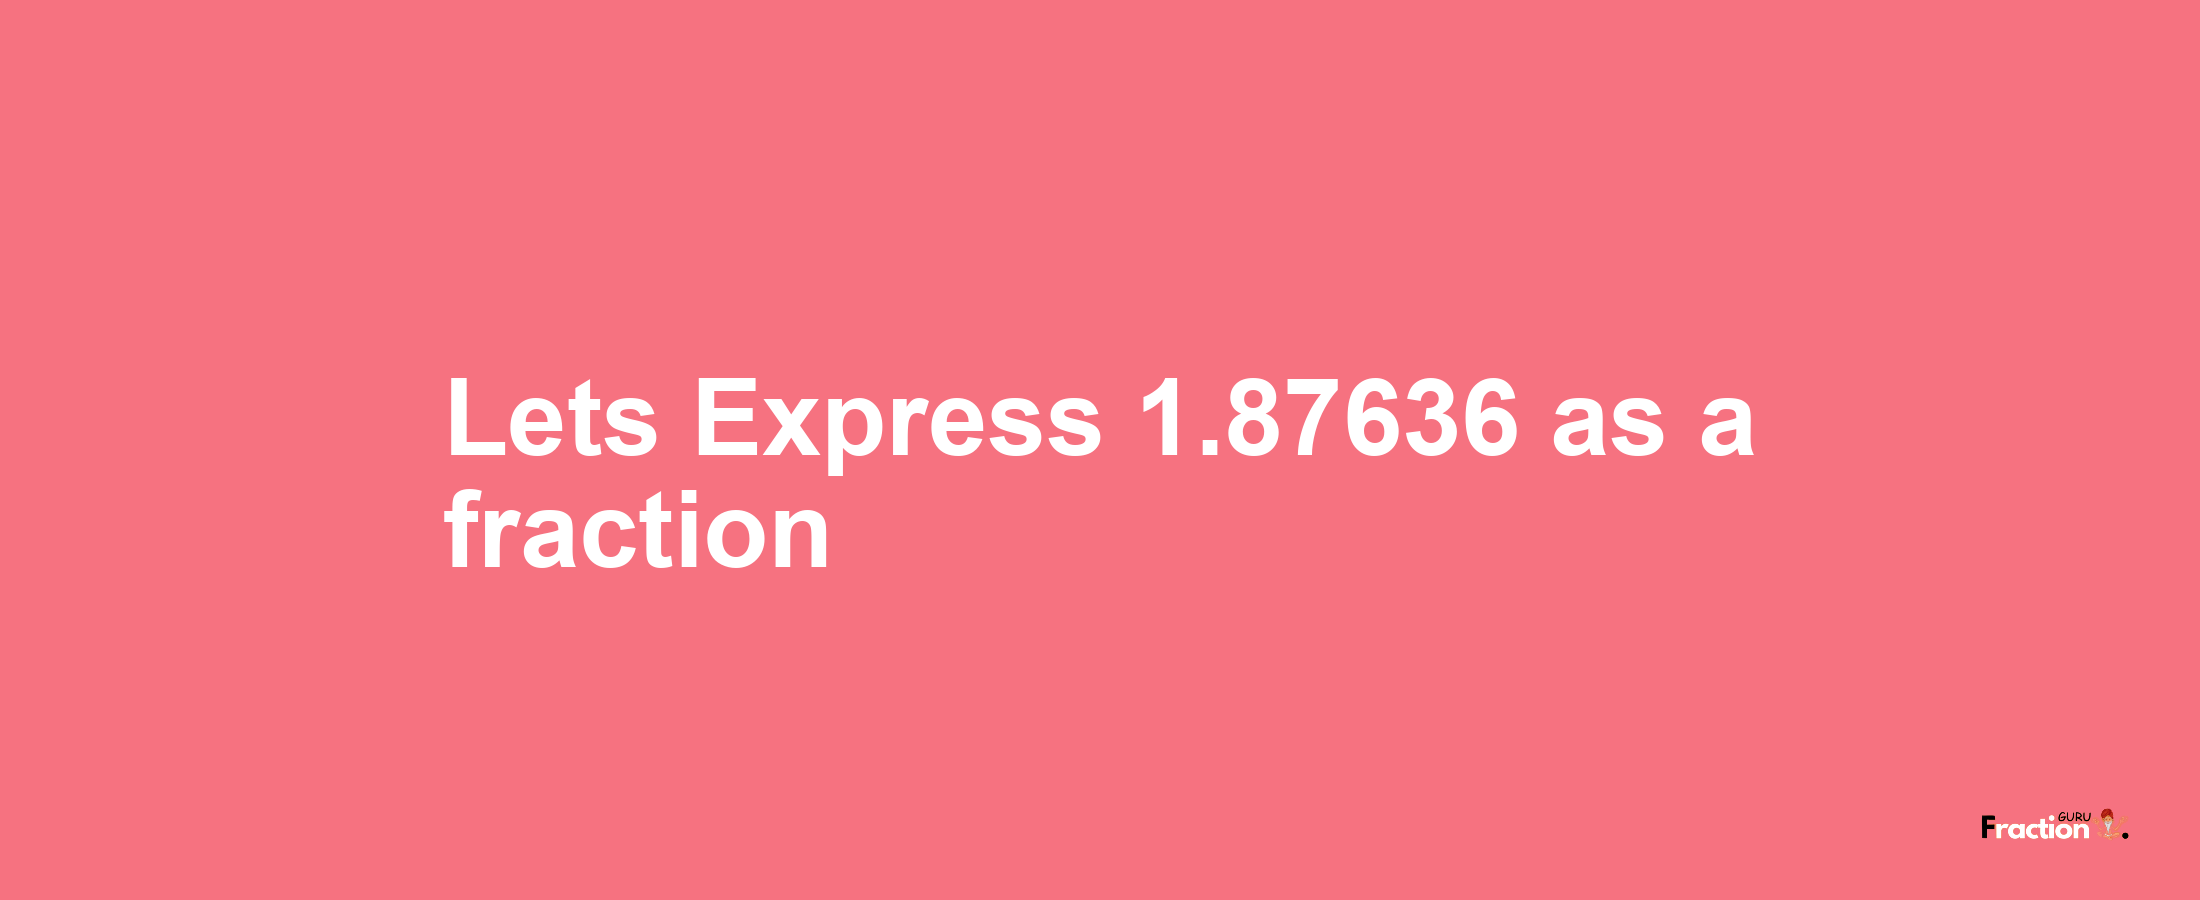 Lets Express 1.87636 as afraction